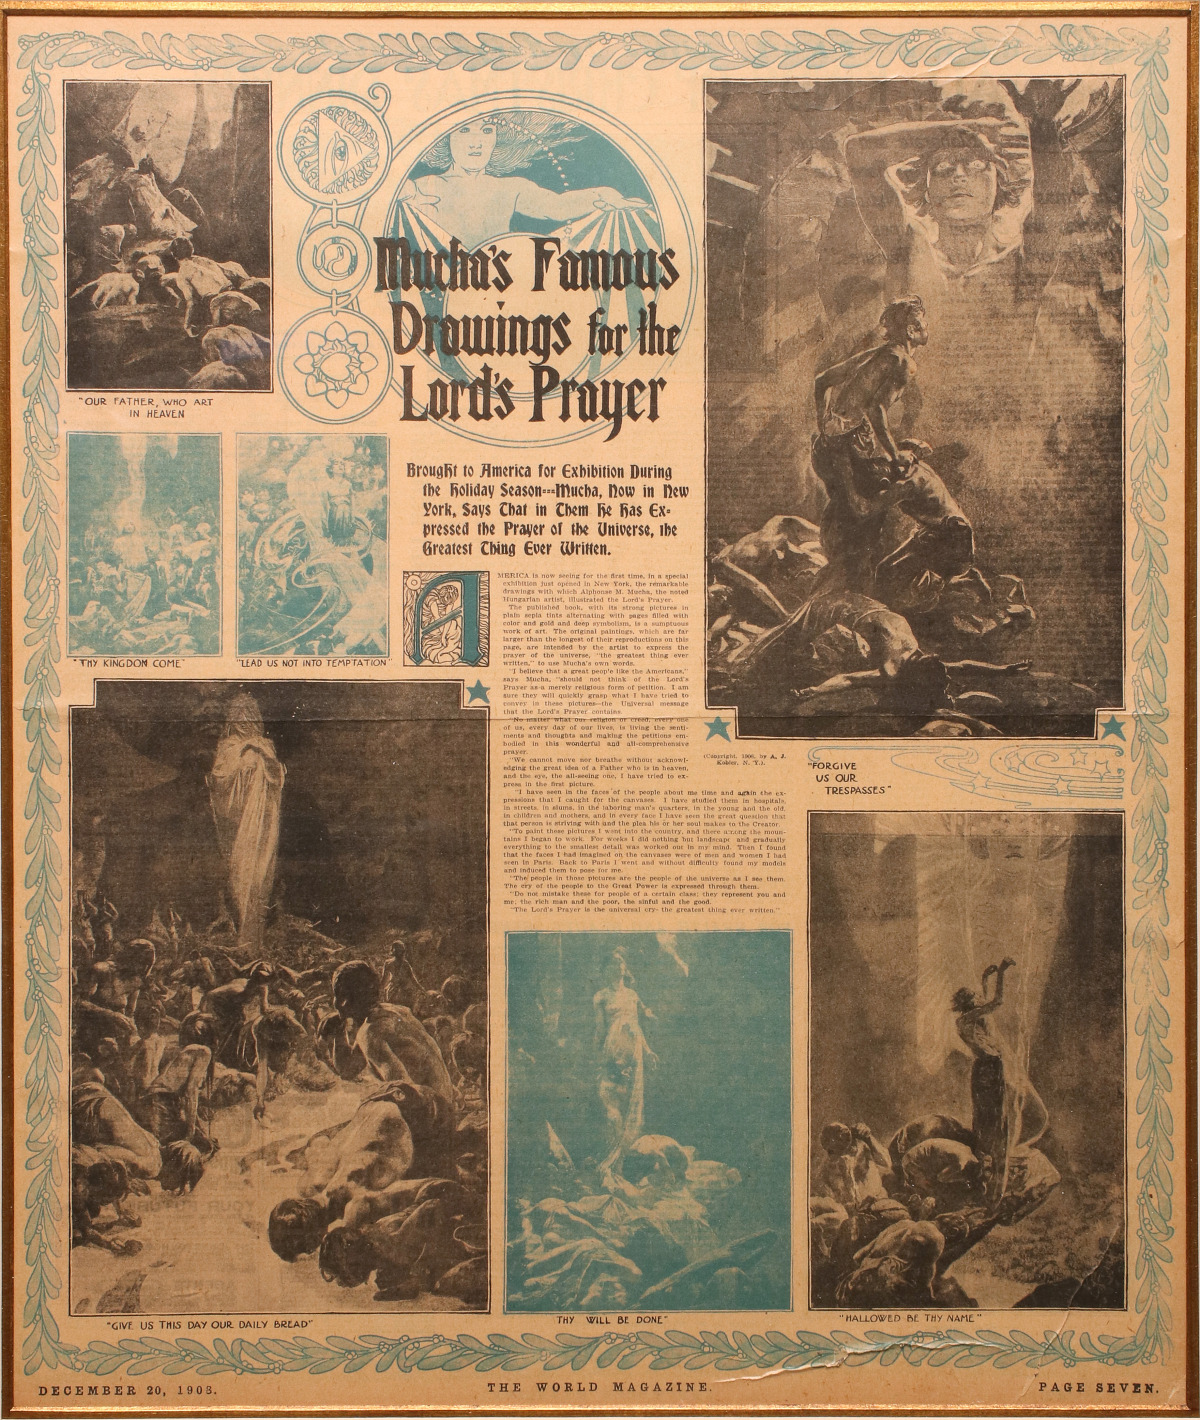 ANNOUNCEMENT FOR 1908 EXHIBITION OF A. MUCHA EXHIBITION